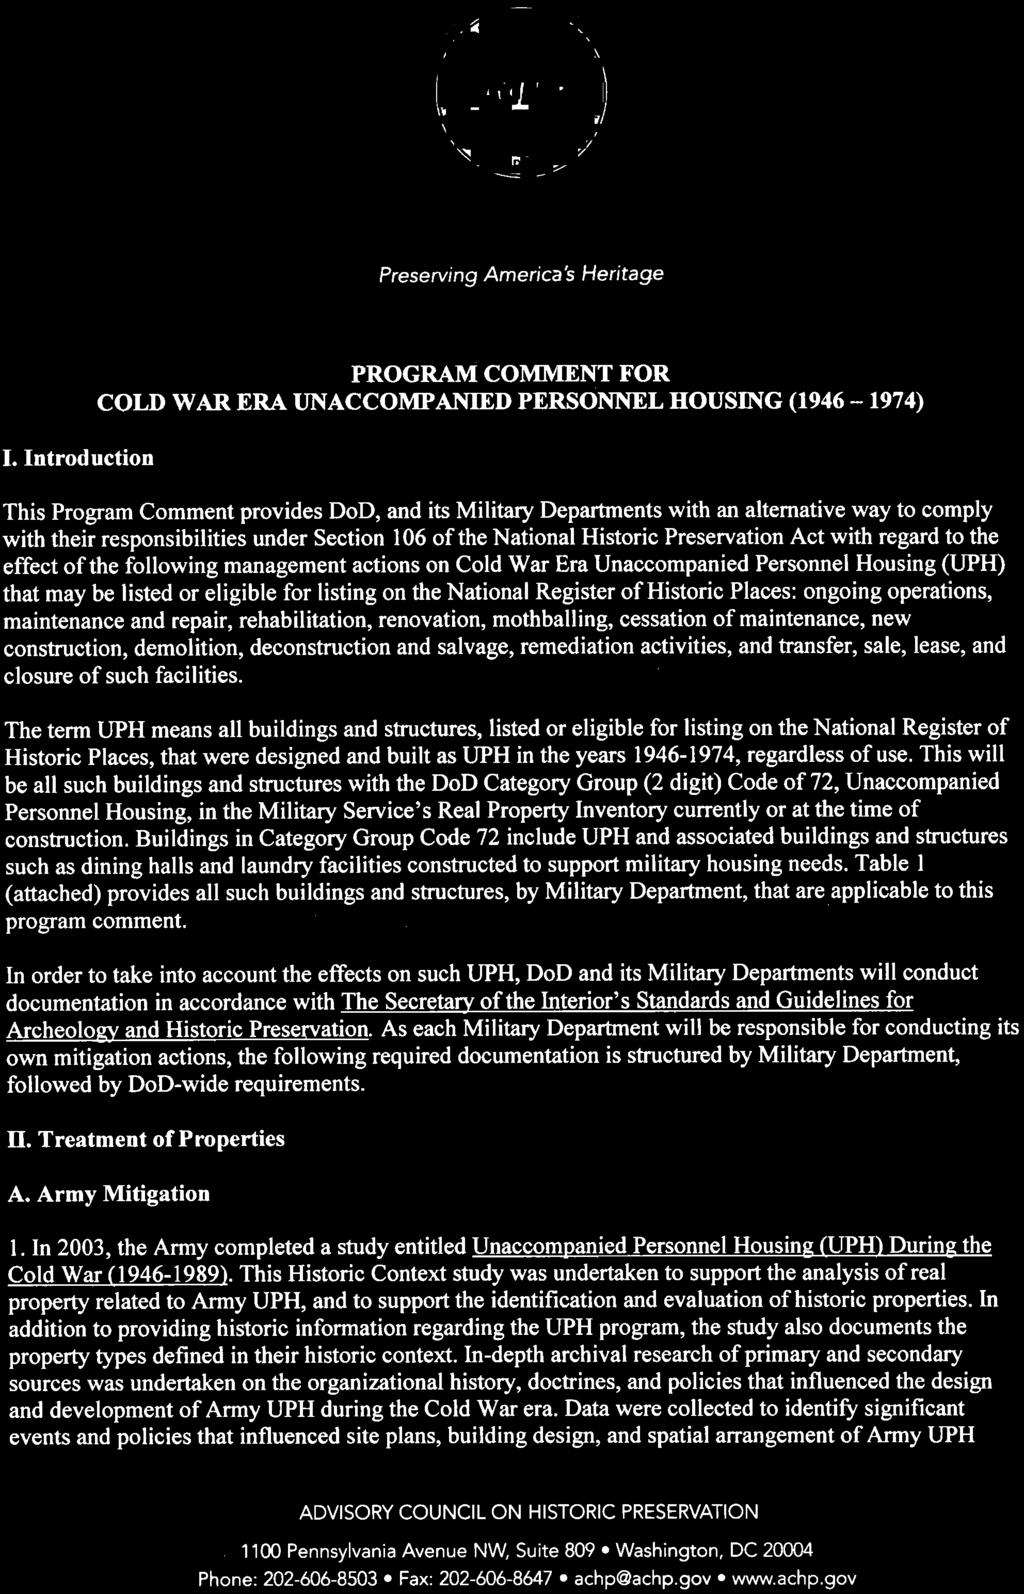 responsibilities under Section 16 of the National Historic Preservation Act with regard to the effect of the following management actions on Cold War Era Unaccompanied Personnel Housing (UPH) that